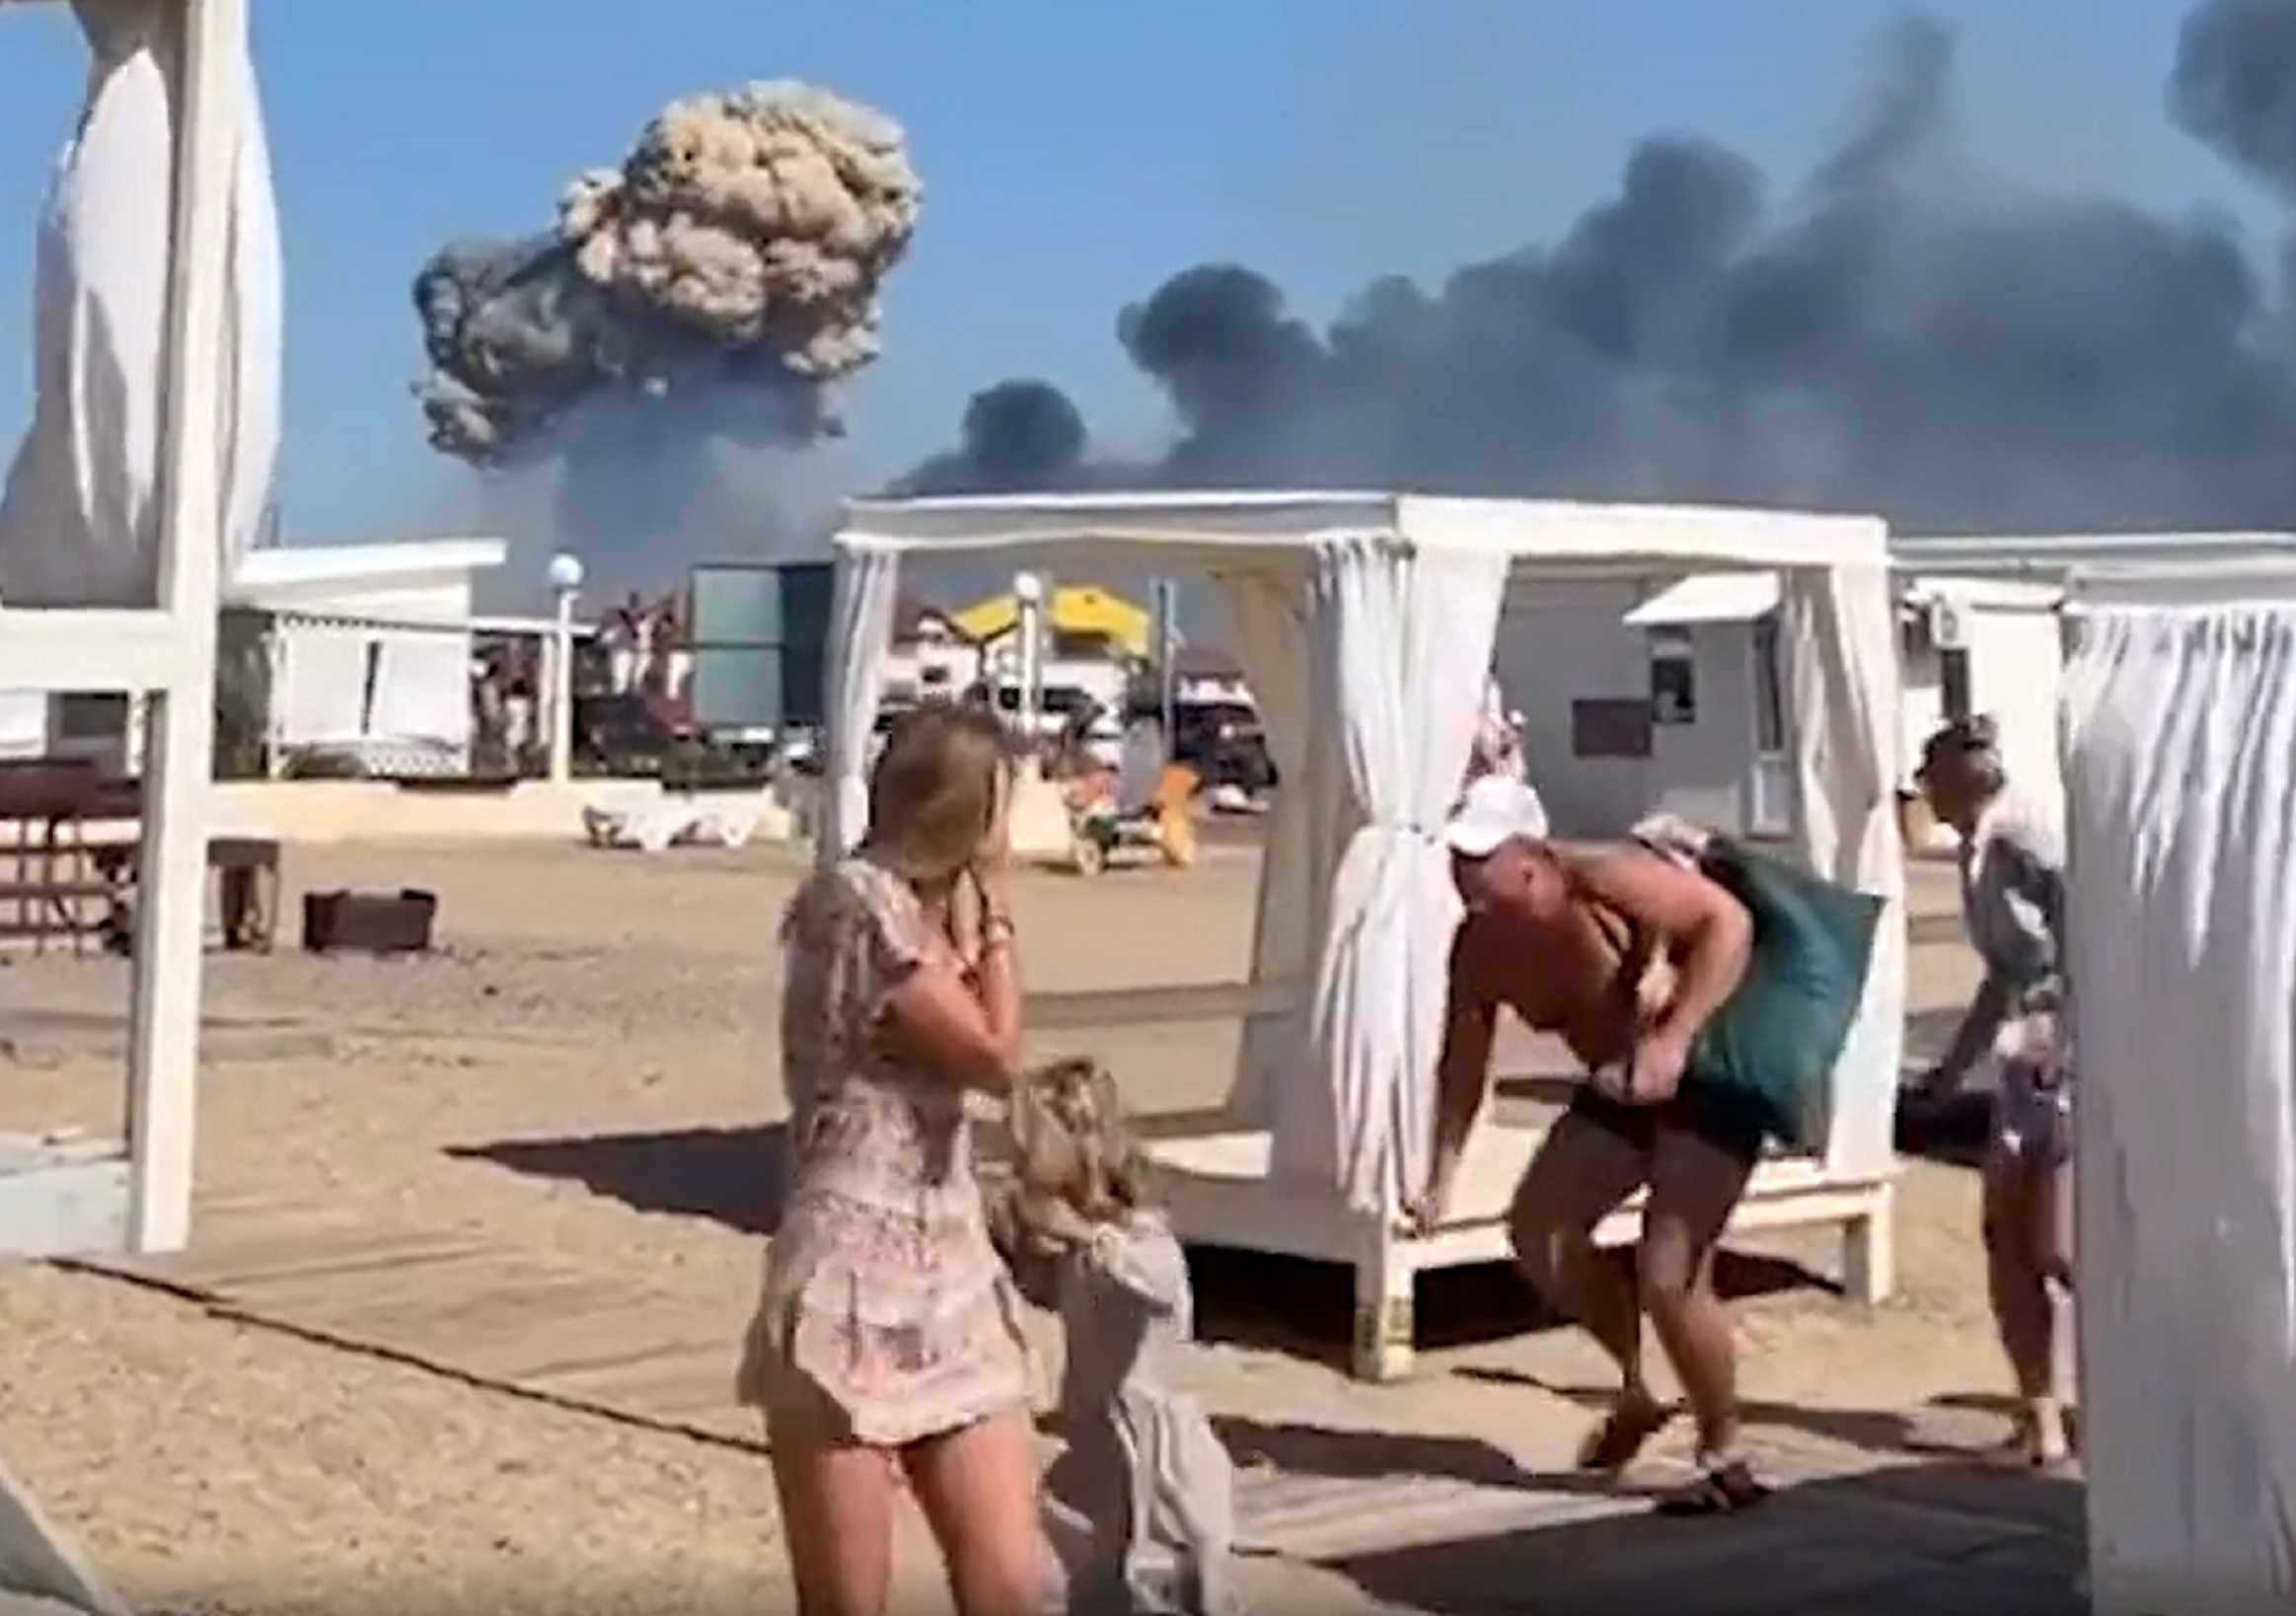 Ukraine Mocks Crying Russian in Crimea With Explosions Video